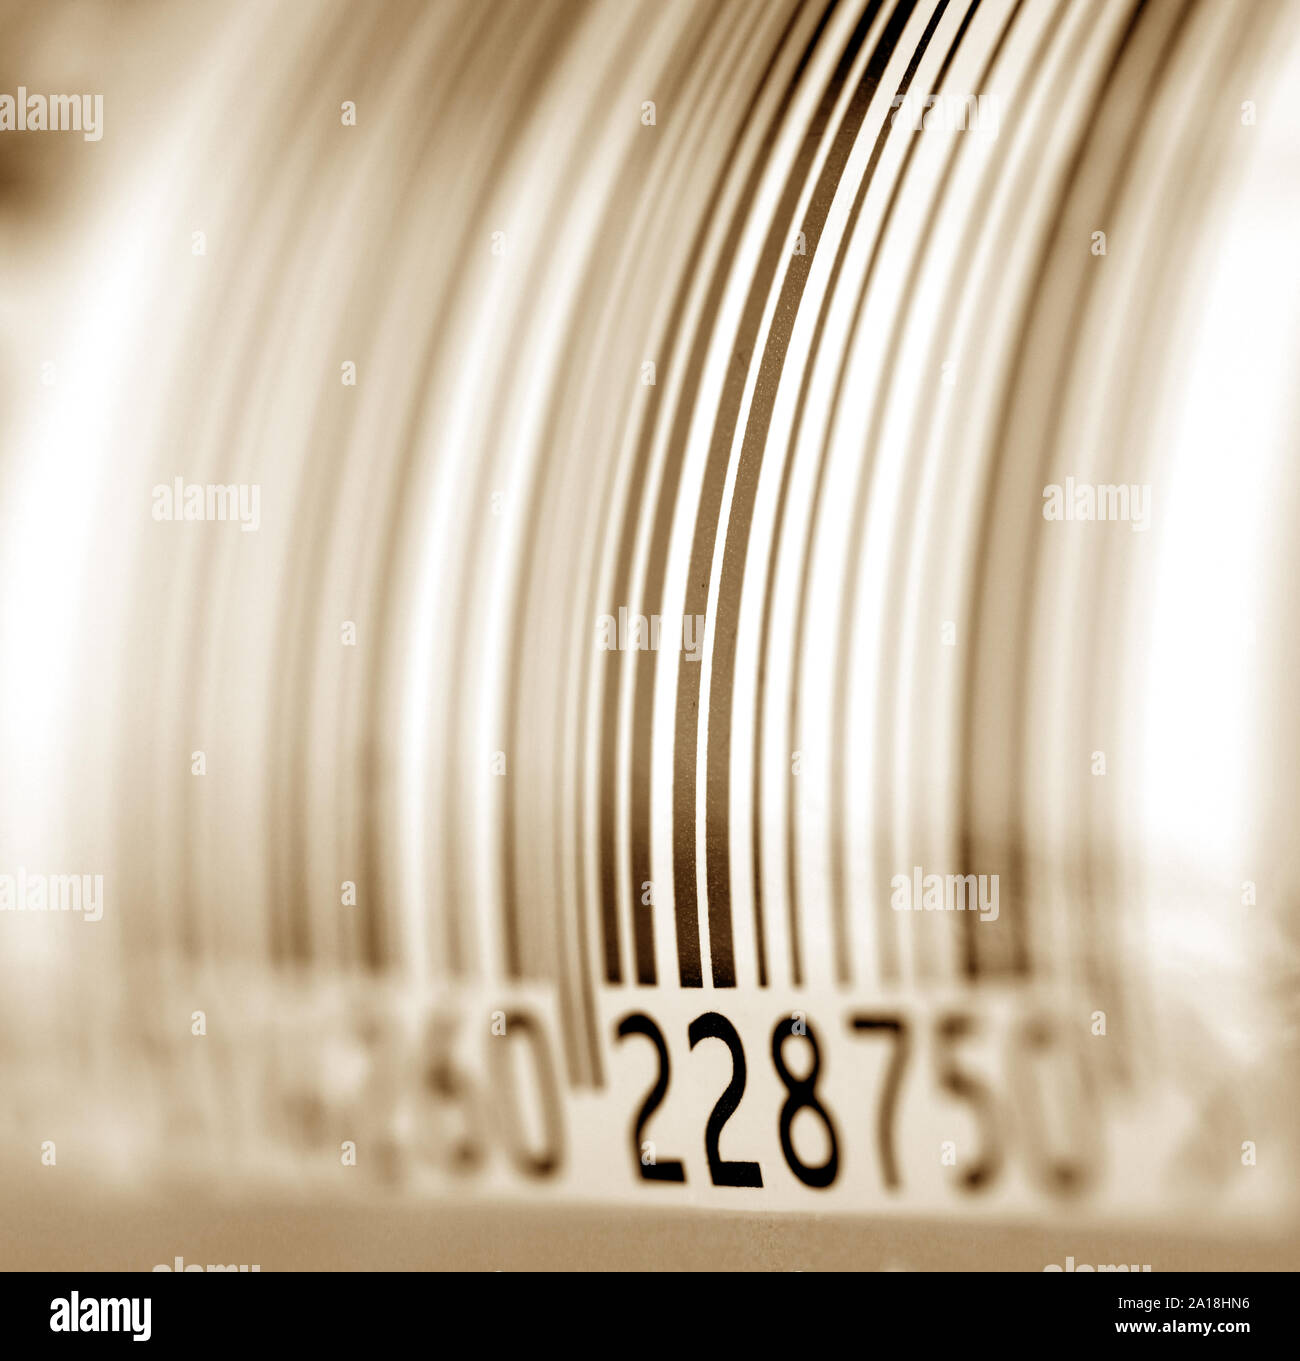 Close up of  Camera LensClose up of Bar code label on paper Stock Photo